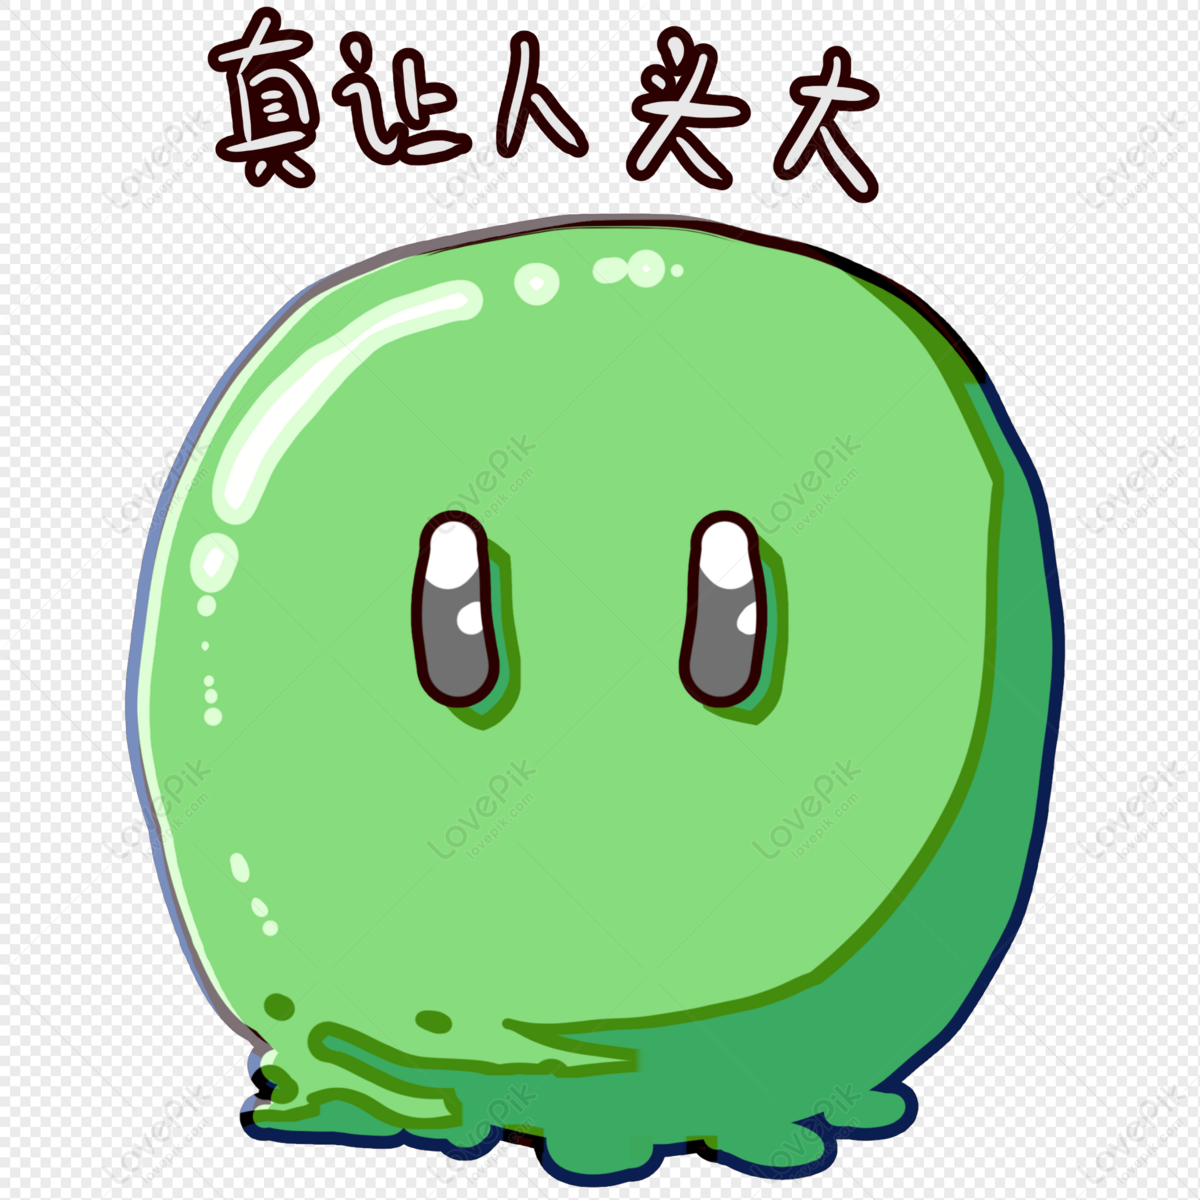 Slime PNG, Vector, PSD, and Clipart With Transparent Background